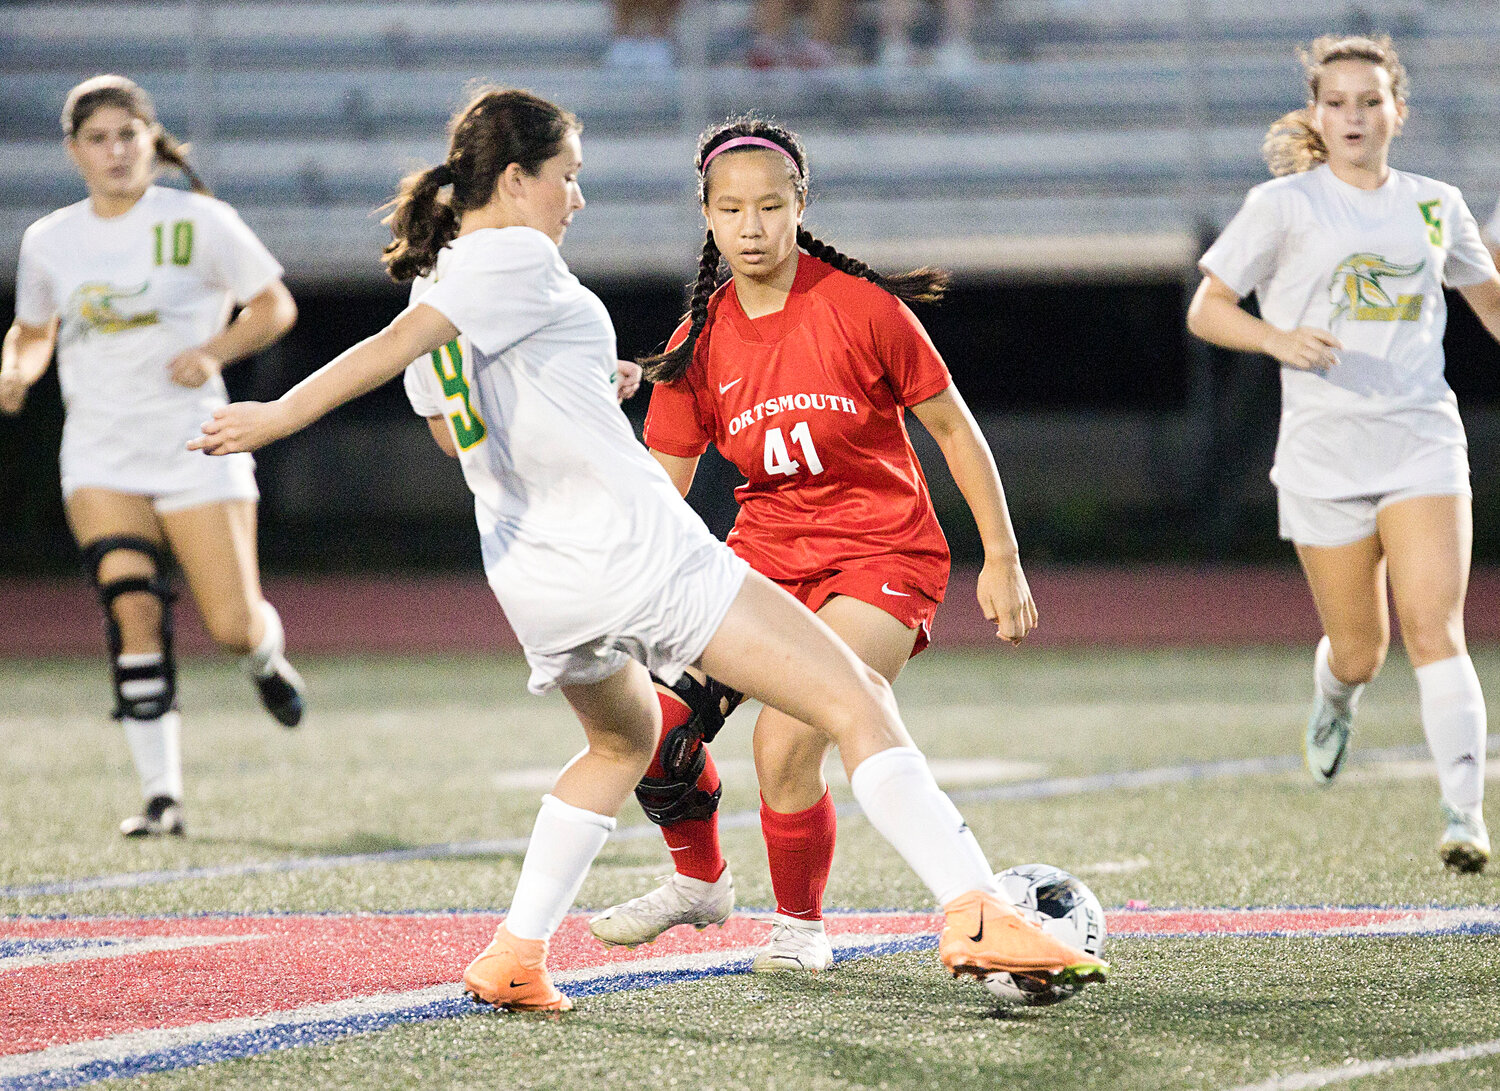 Elena Sun pressures a North Smithfield defender early, in the first half of Tuesday’s game.